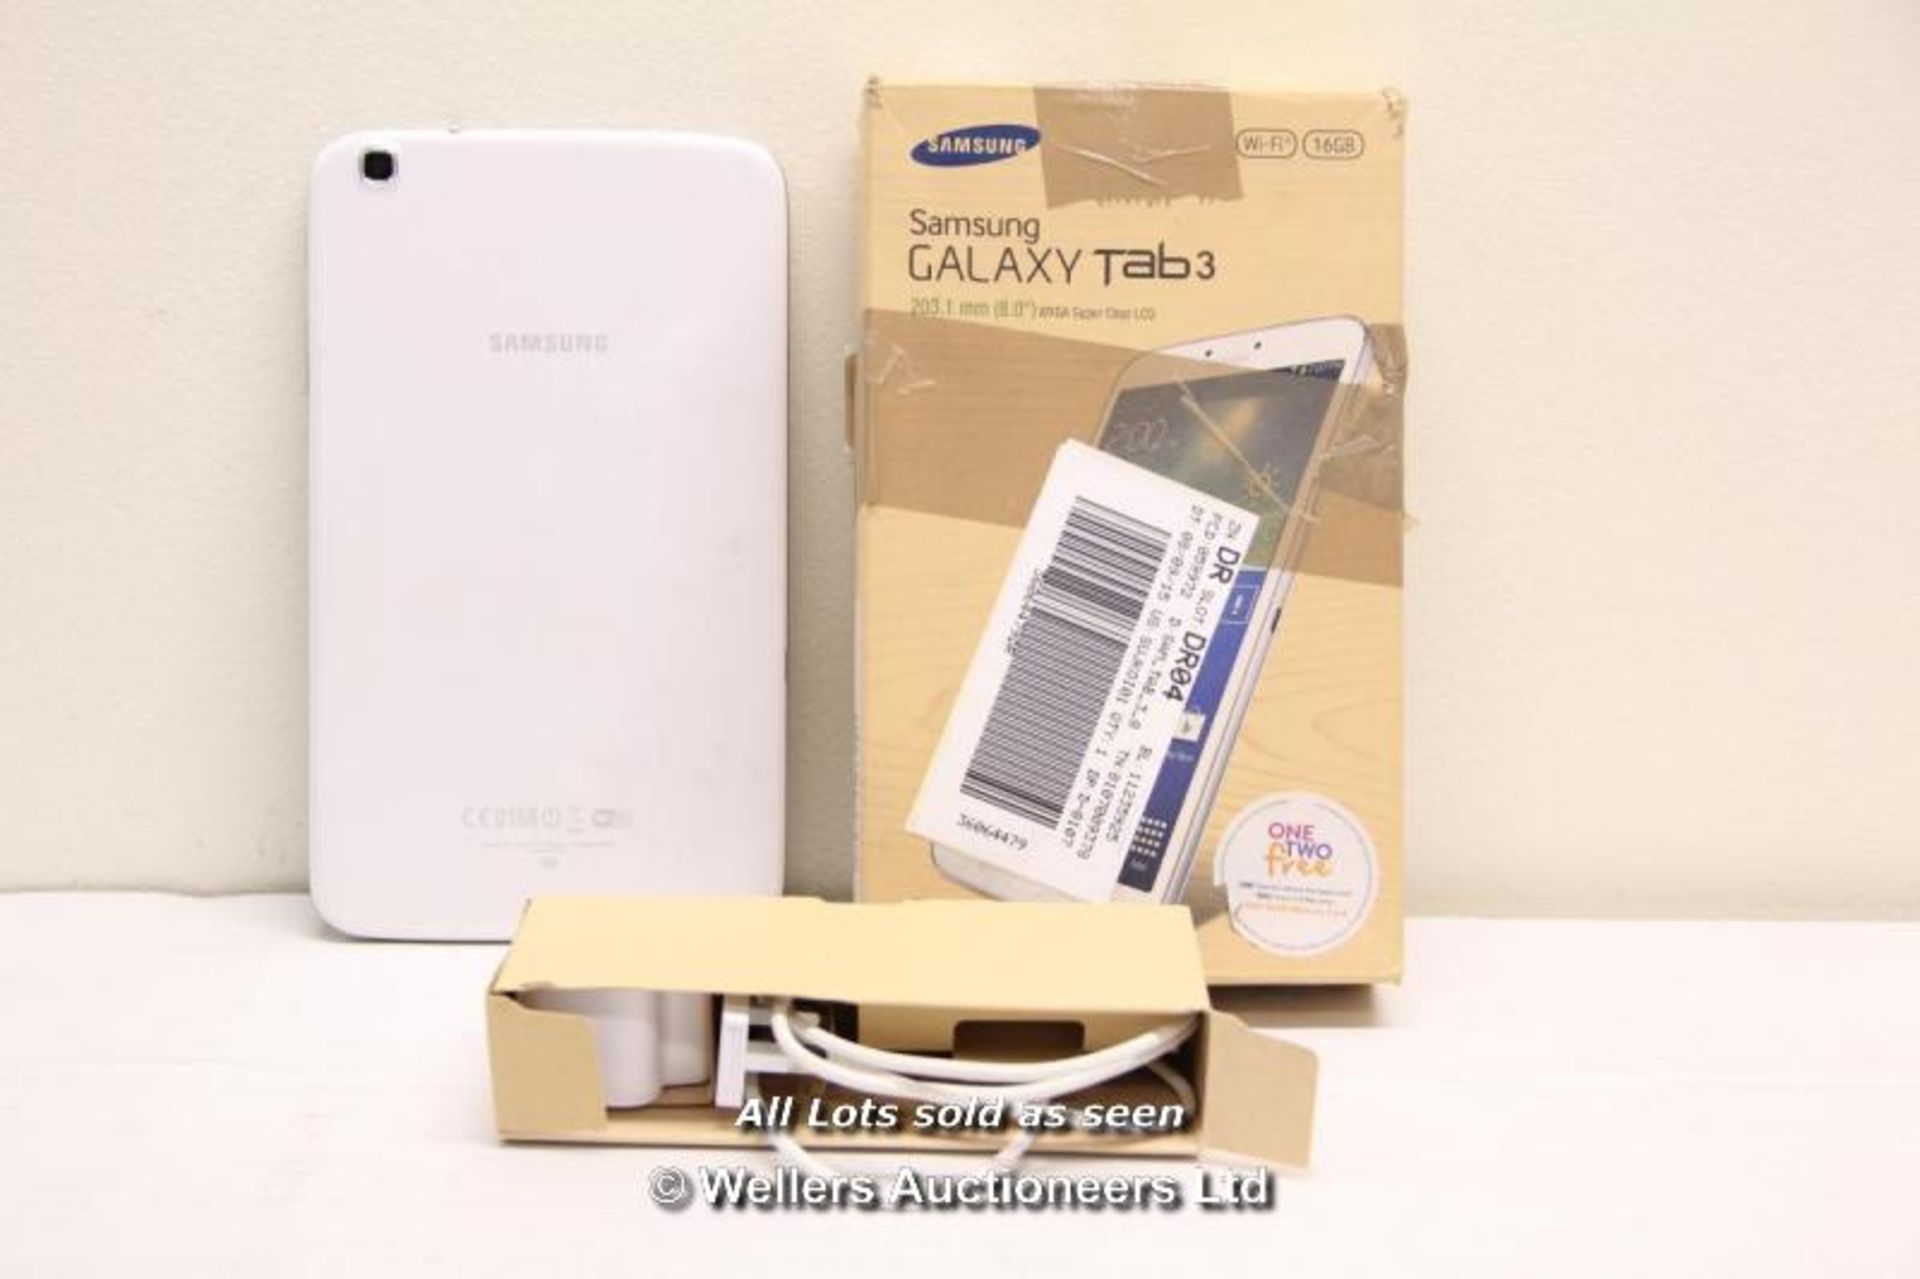 SAMSUNG GALAXY TAB 3 SM-T310 16GB WI-FI  8" - WHITE (36064479) / INCLUDING CHARGER AND USB CABLE / - Image 2 of 2